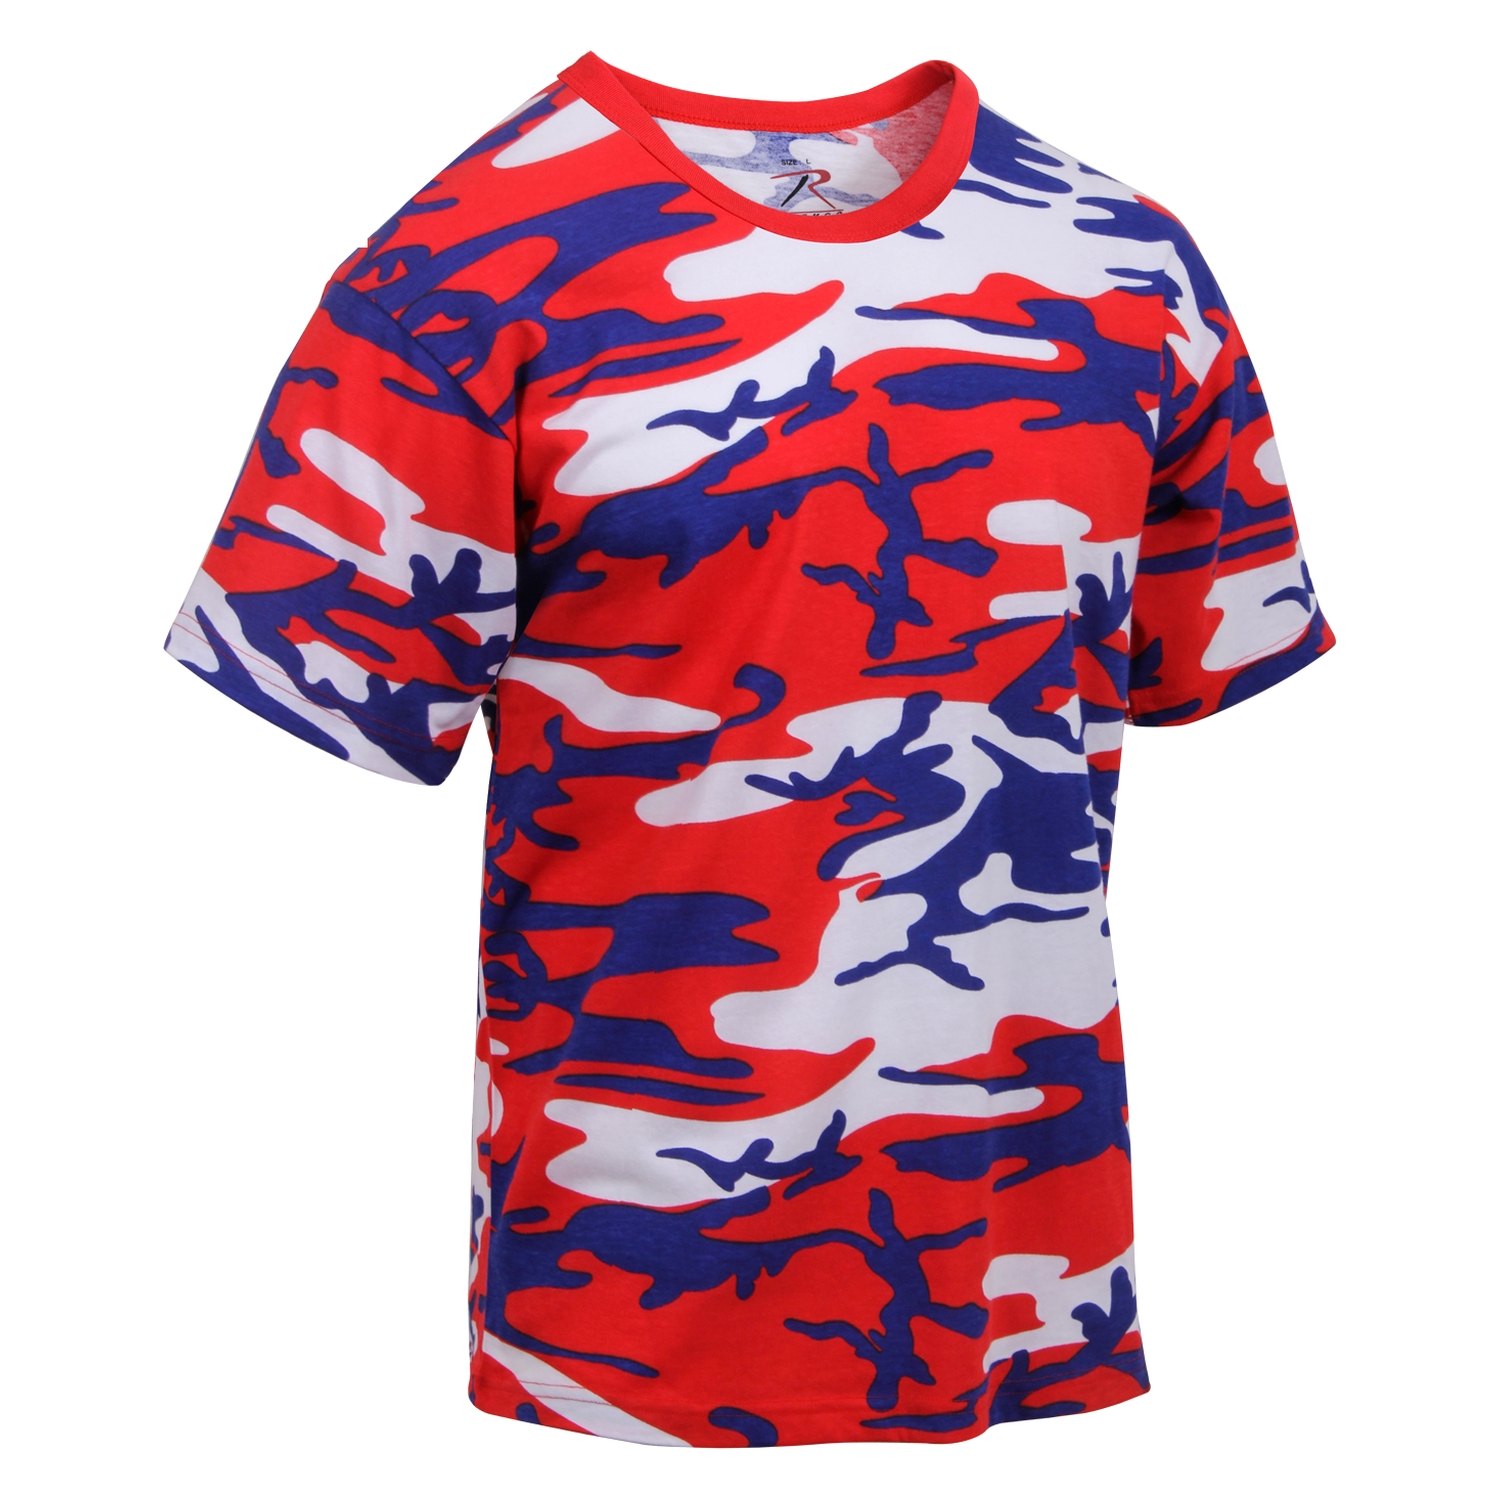 Rothco® 3192-Red/White/Blue-XL - Men's X-Large Red/White/Blue Camo T ...